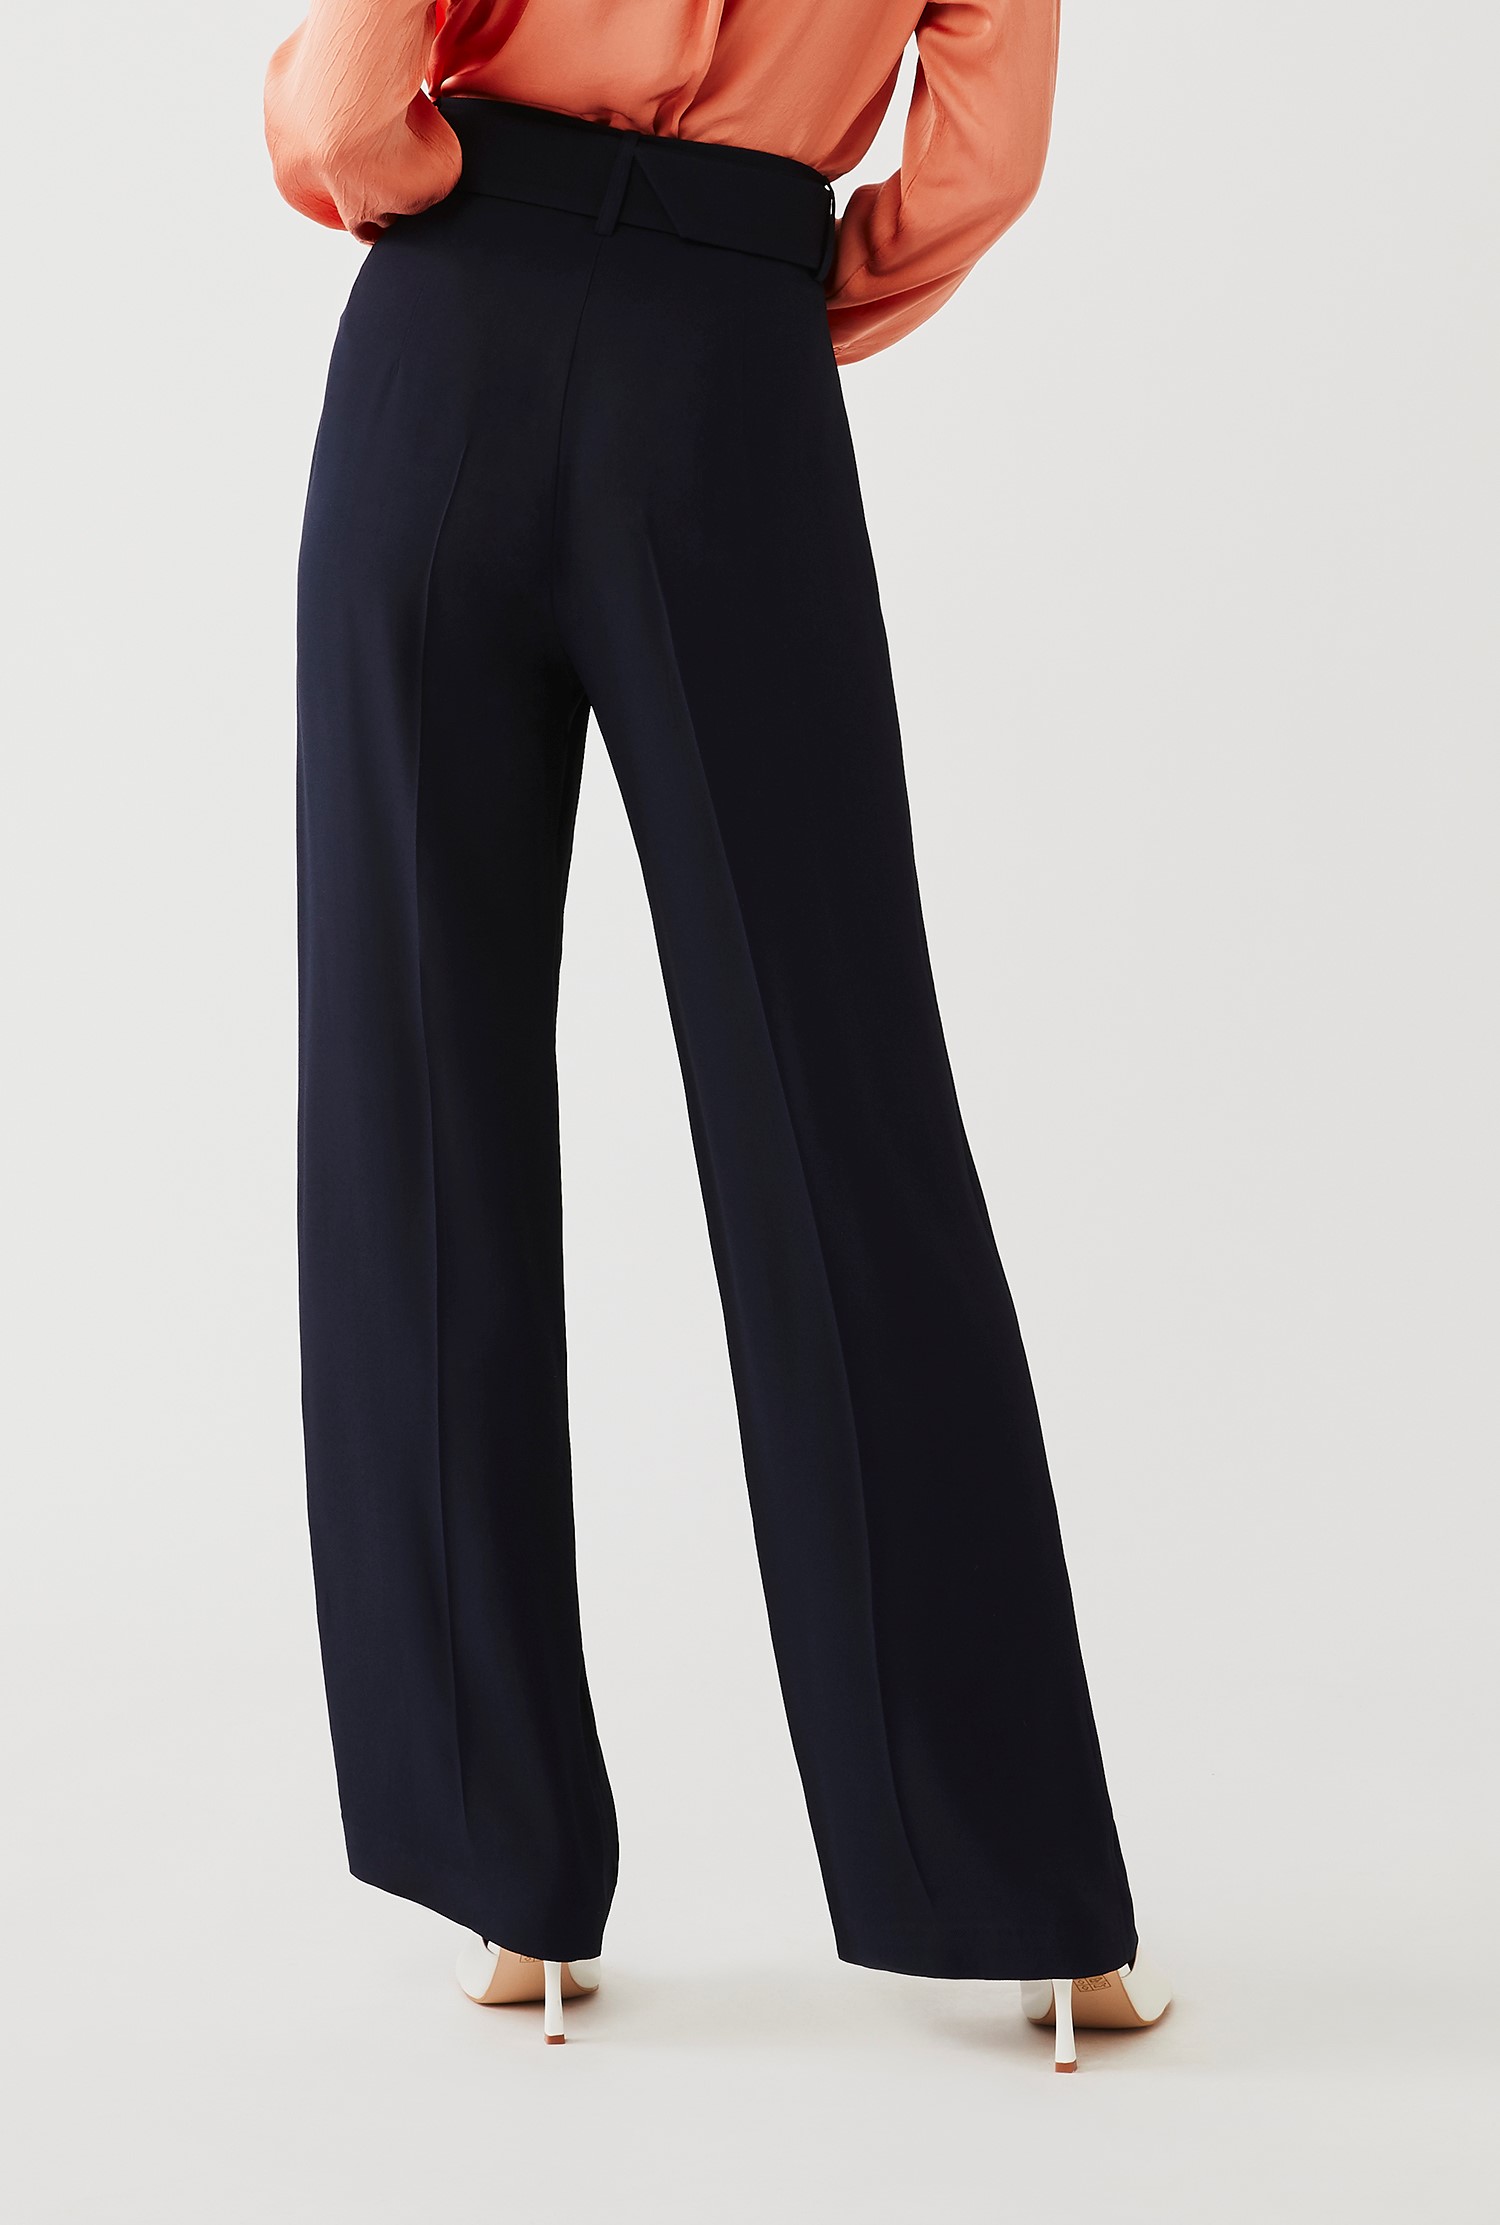 Satin Trouser with Belt and Buckle Detail in Black | Ghost London